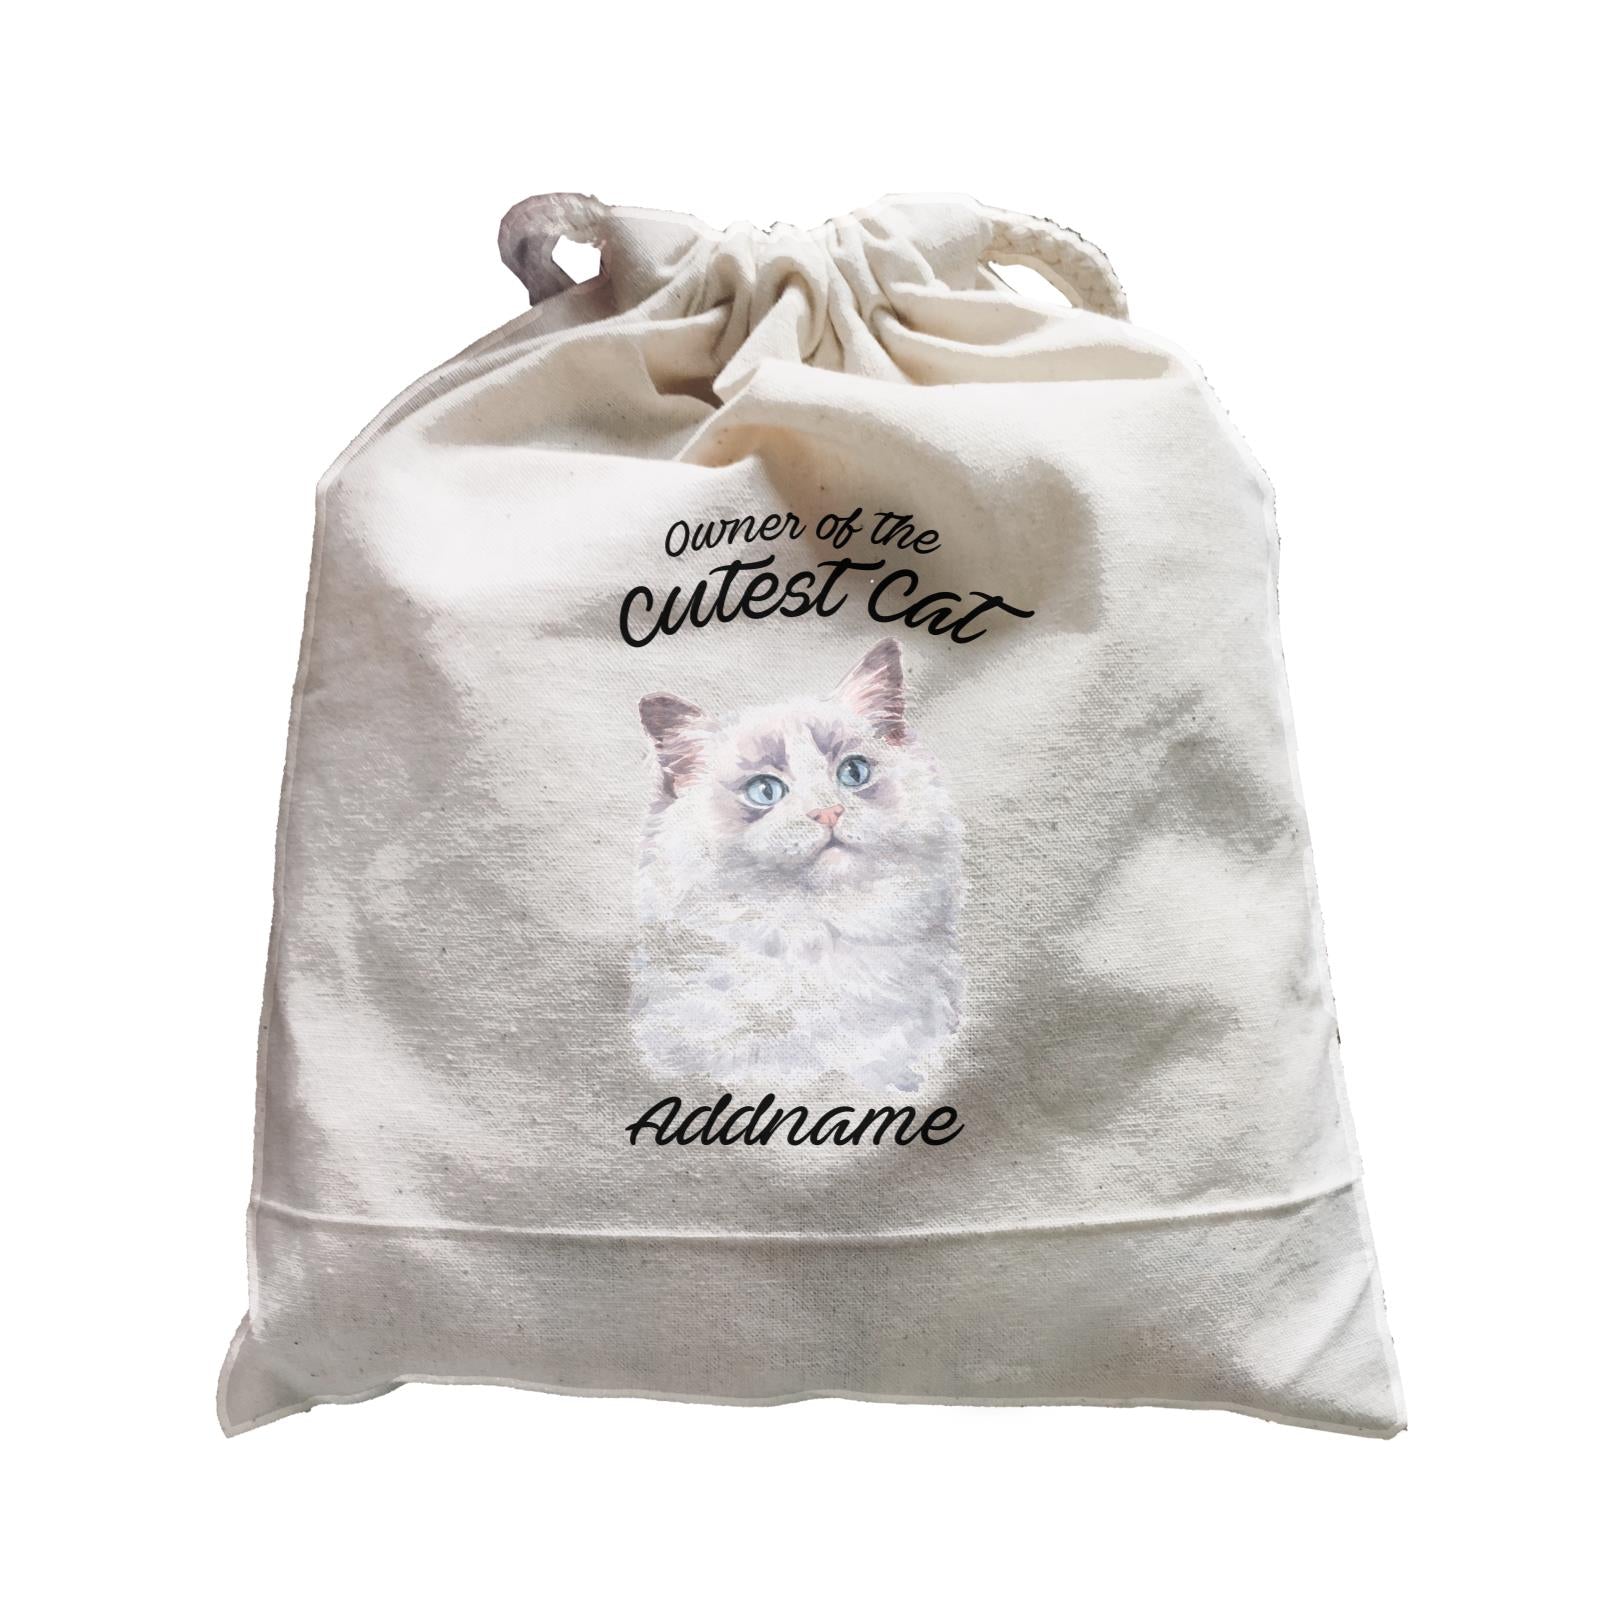 Watercolor Owner Of The Cutest Cat Ragdoll White Addname Satchel